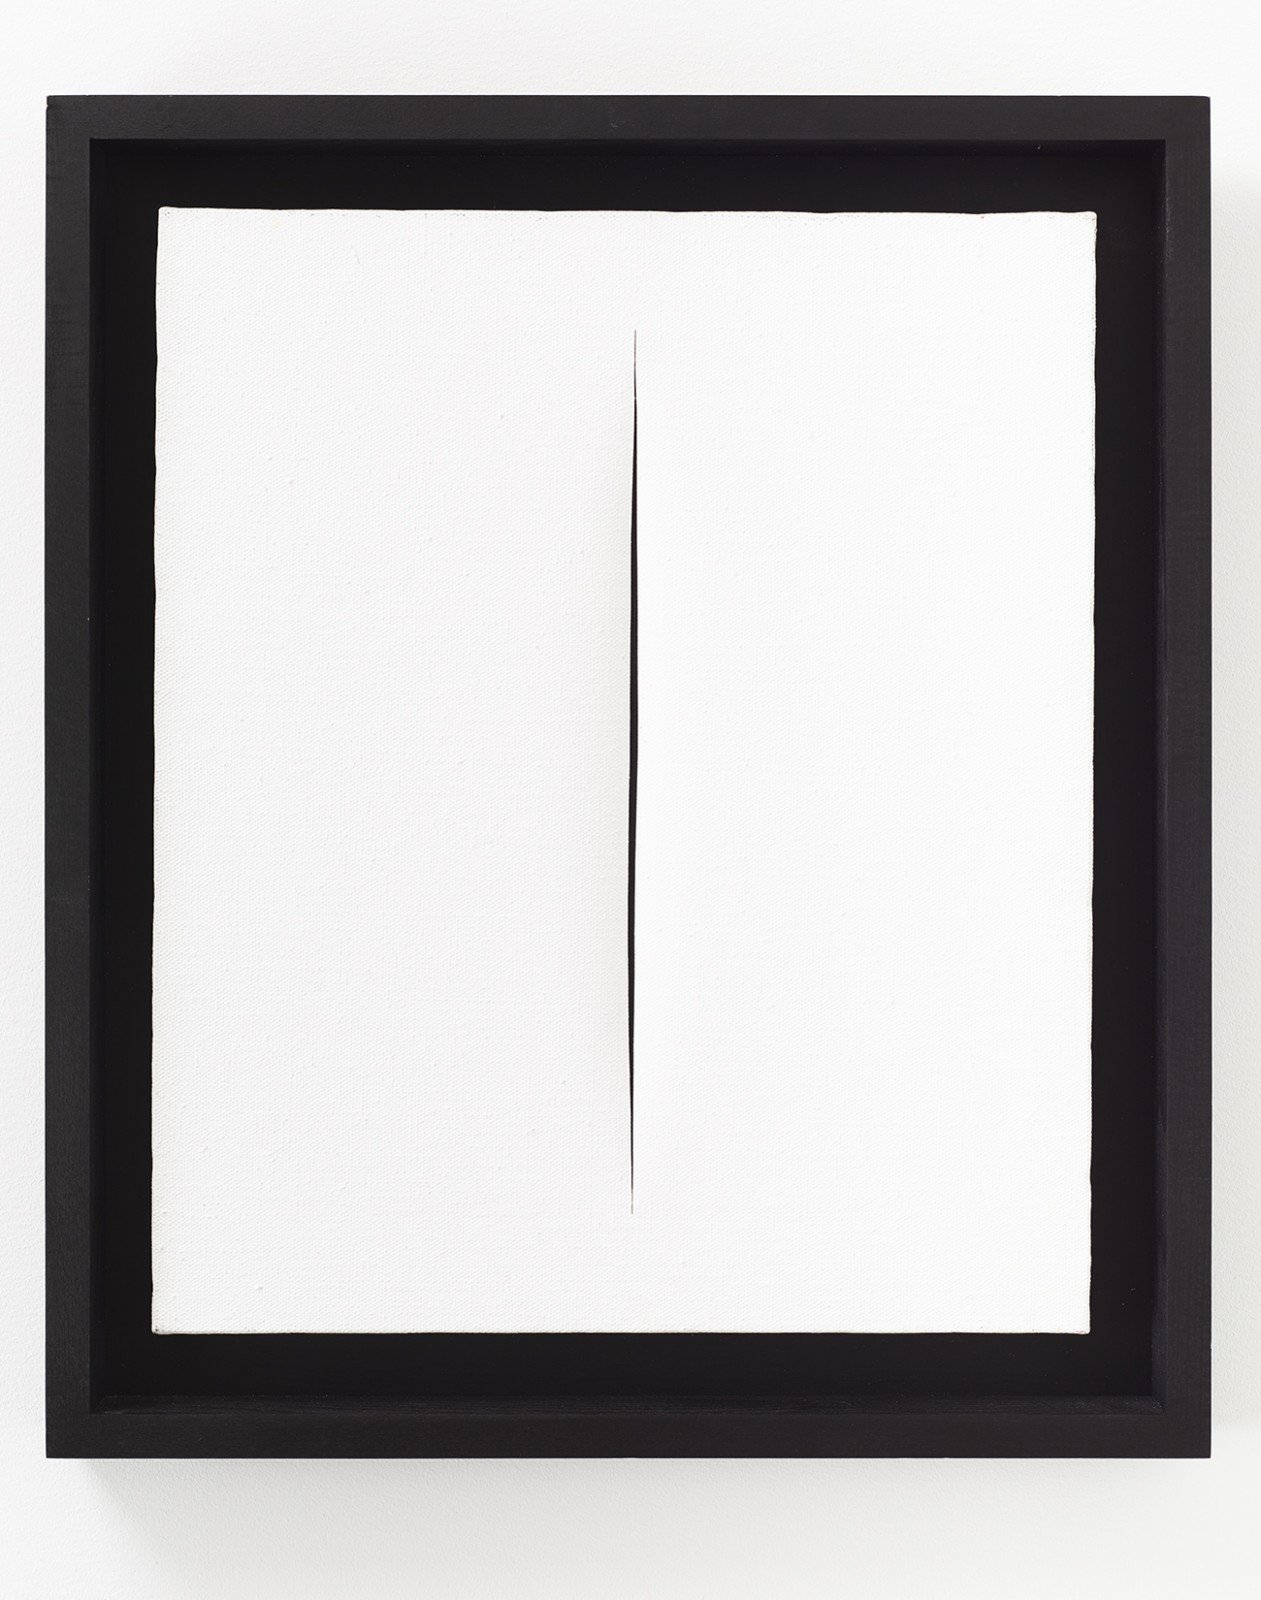 Lucio Fontana, Concceto spaziale, attese, 1966, Waterpaint on canvas, 22 x 18 inches.